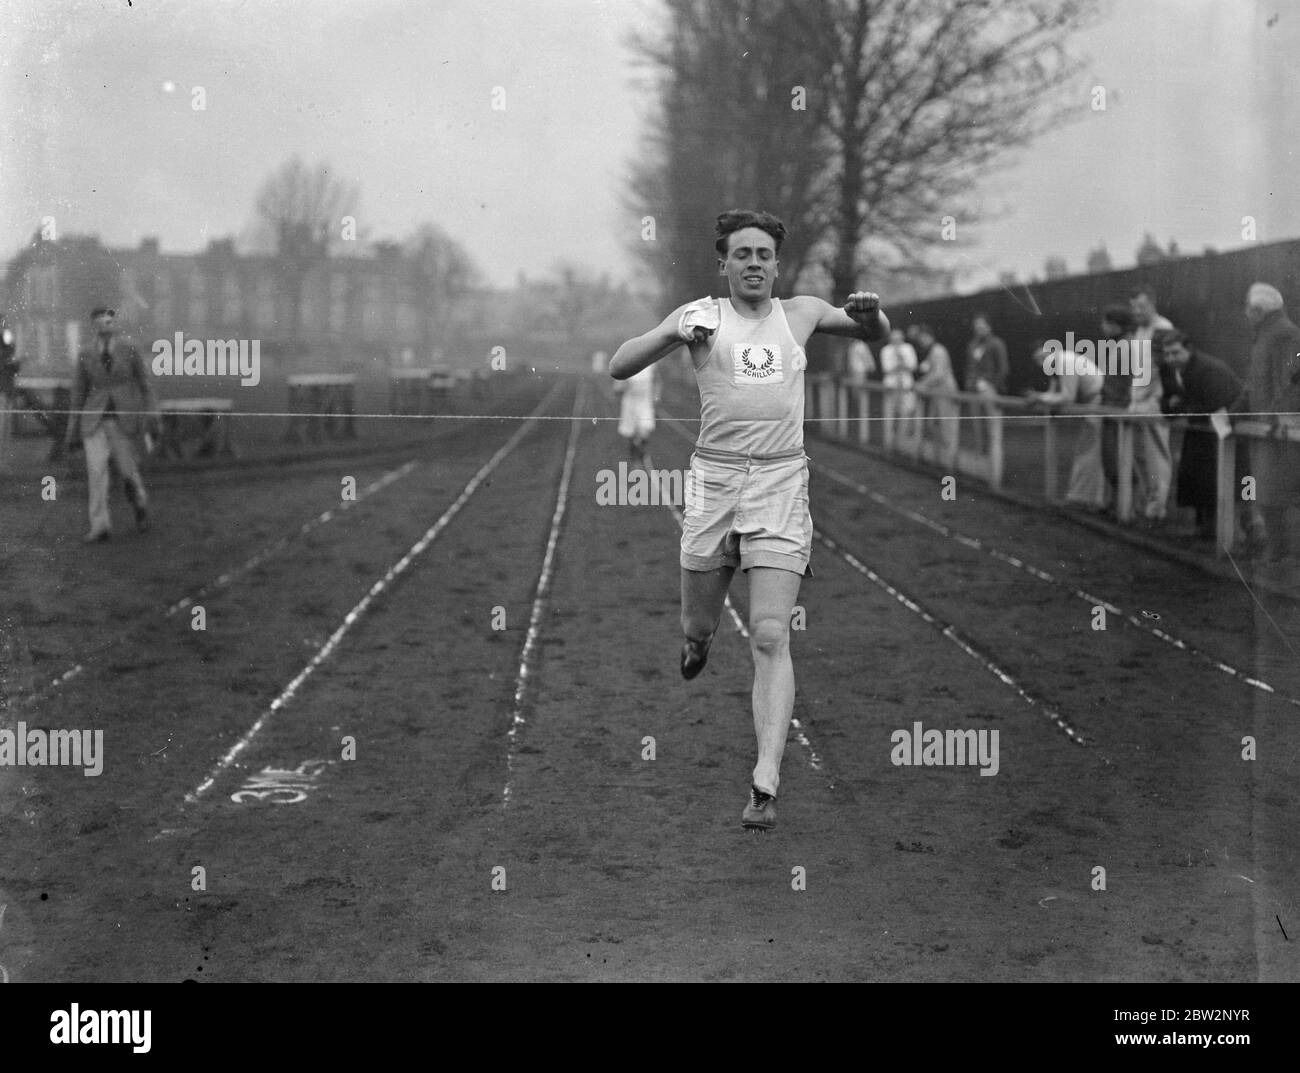 Winning the mile in the Cambridge finals . Fitzwilliam House and Magdalene met in the finals of the Cambridge University inter collegiate contests . C Whitehead winning the mile in fine style . 15 February 1932 Stock Photo